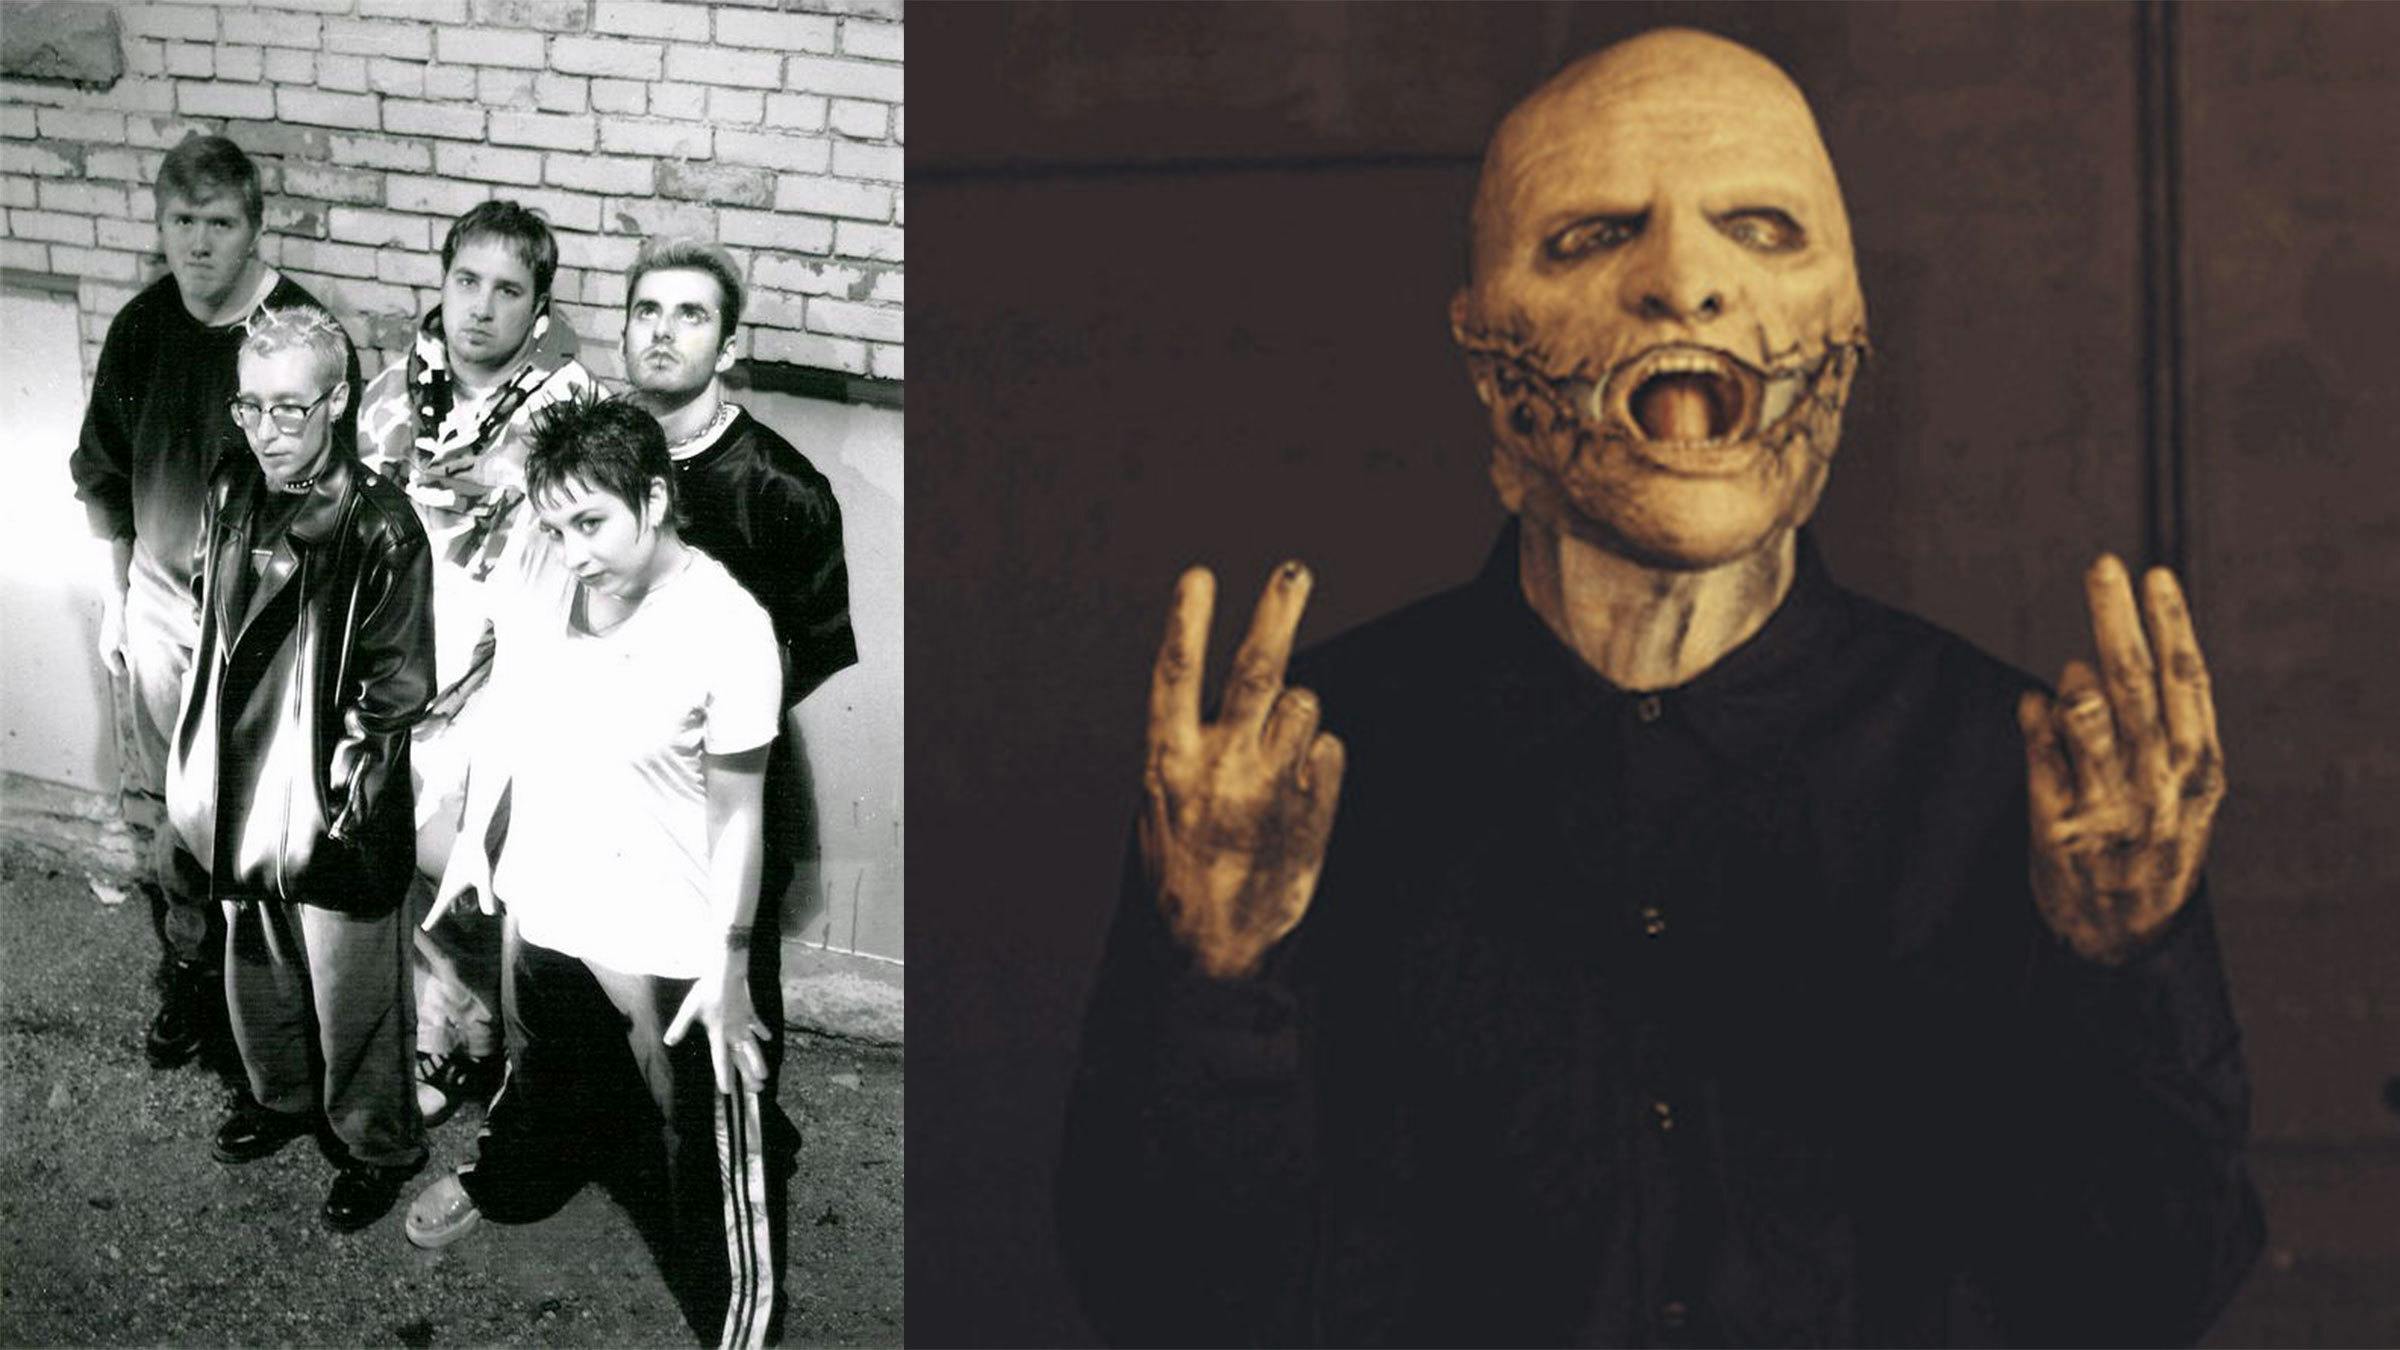 Listen To A Young Corey Taylor Doing Guest Vocals On This Lost Nu-Metal Track